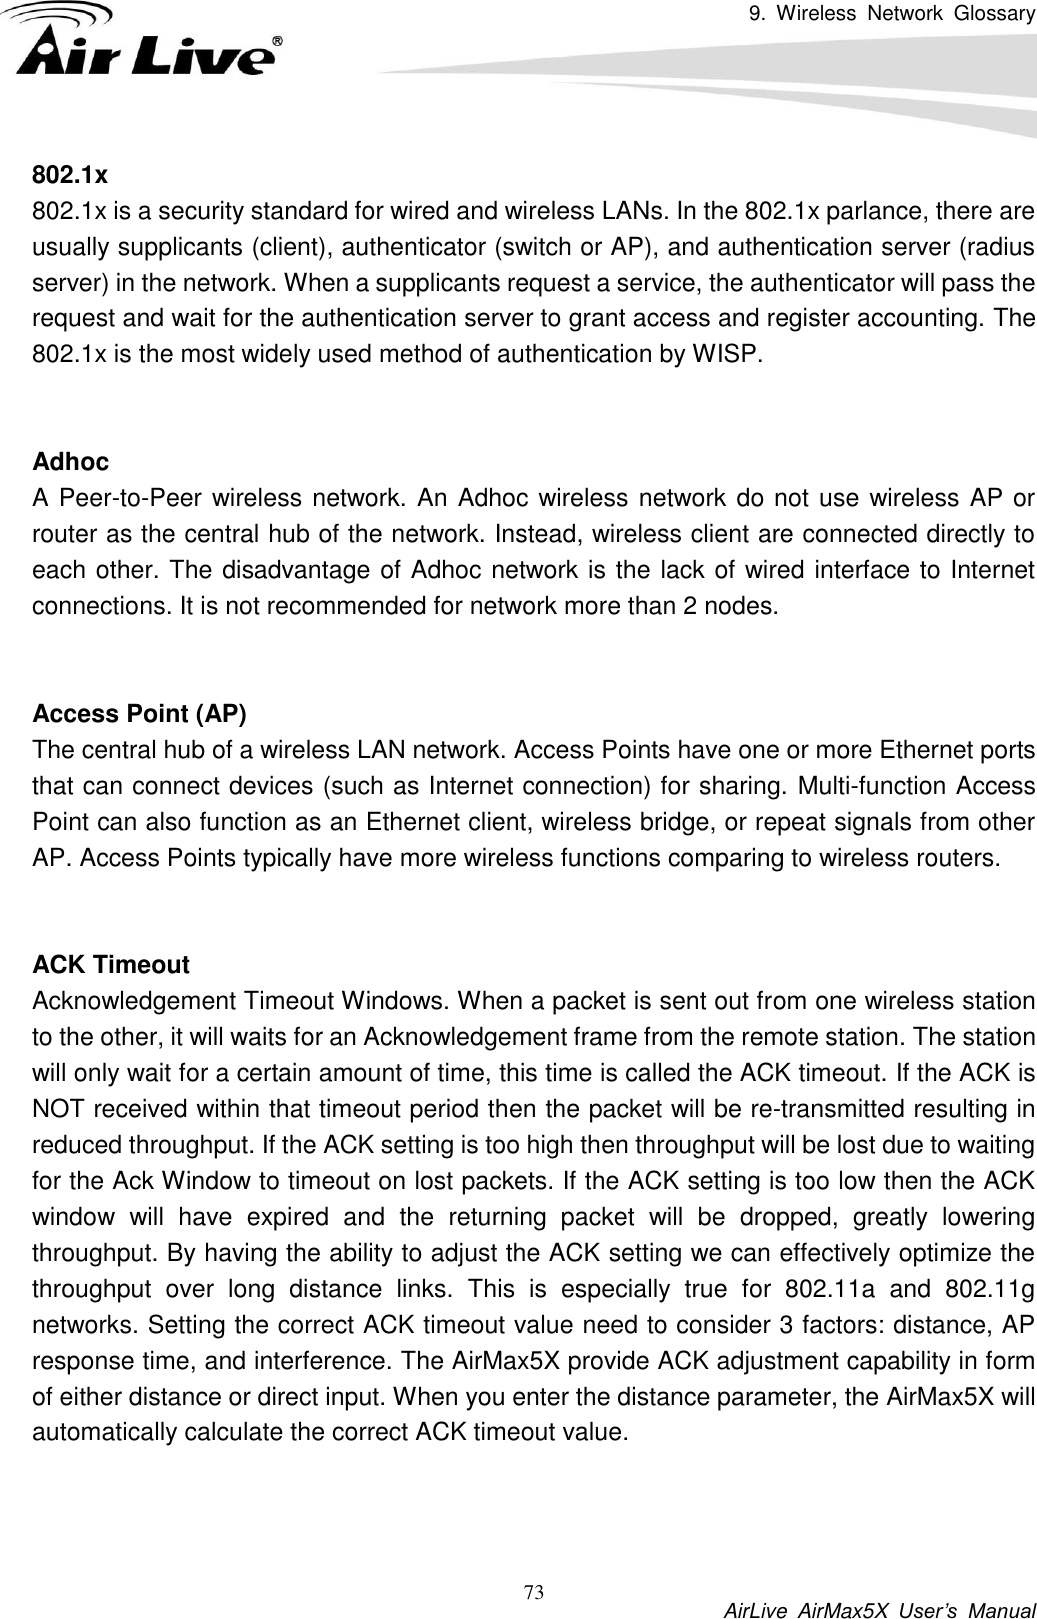 9.  Wireless  Network  Glossary           AirLive  AirMax5X  User’s  Manual 73 802.1x 802.1x is a security standard for wired and wireless LANs. In the 802.1x parlance, there are usually supplicants (client), authenticator (switch or AP), and authentication server (radius server) in the network. When a supplicants request a service, the authenticator will pass the request and wait for the authentication server to grant access and register accounting. The 802.1x is the most widely used method of authentication by WISP.   Adhoc A Peer-to-Peer wireless network. An Adhoc wireless network do not use wireless AP or router as the central hub of the network. Instead, wireless client are connected directly to each other. The disadvantage of Adhoc network is the lack of wired interface to Internet connections. It is not recommended for network more than 2 nodes.   Access Point (AP) The central hub of a wireless LAN network. Access Points have one or more Ethernet ports that can connect devices (such as Internet connection) for sharing. Multi-function Access Point can also function as an Ethernet client, wireless bridge, or repeat signals from other AP. Access Points typically have more wireless functions comparing to wireless routers.   ACK Timeout Acknowledgement Timeout Windows. When a packet is sent out from one wireless station to the other, it will waits for an Acknowledgement frame from the remote station. The station will only wait for a certain amount of time, this time is called the ACK timeout. If the ACK is NOT received within that timeout period then the packet will be re-transmitted resulting in reduced throughput. If the ACK setting is too high then throughput will be lost due to waiting for the Ack Window to timeout on lost packets. If the ACK setting is too low then the ACK window  will  have  expired  and  the  returning  packet  will  be  dropped,  greatly  lowering throughput. By having the ability to adjust the ACK setting we can effectively optimize the throughput  over  long  distance  links.  This  is  especially  true  for  802.11a  and  802.11g networks. Setting the correct ACK timeout value need to consider 3 factors: distance, AP response time, and interference. The AirMax5X provide ACK adjustment capability in form of either distance or direct input. When you enter the distance parameter, the AirMax5X will automatically calculate the correct ACK timeout value.    